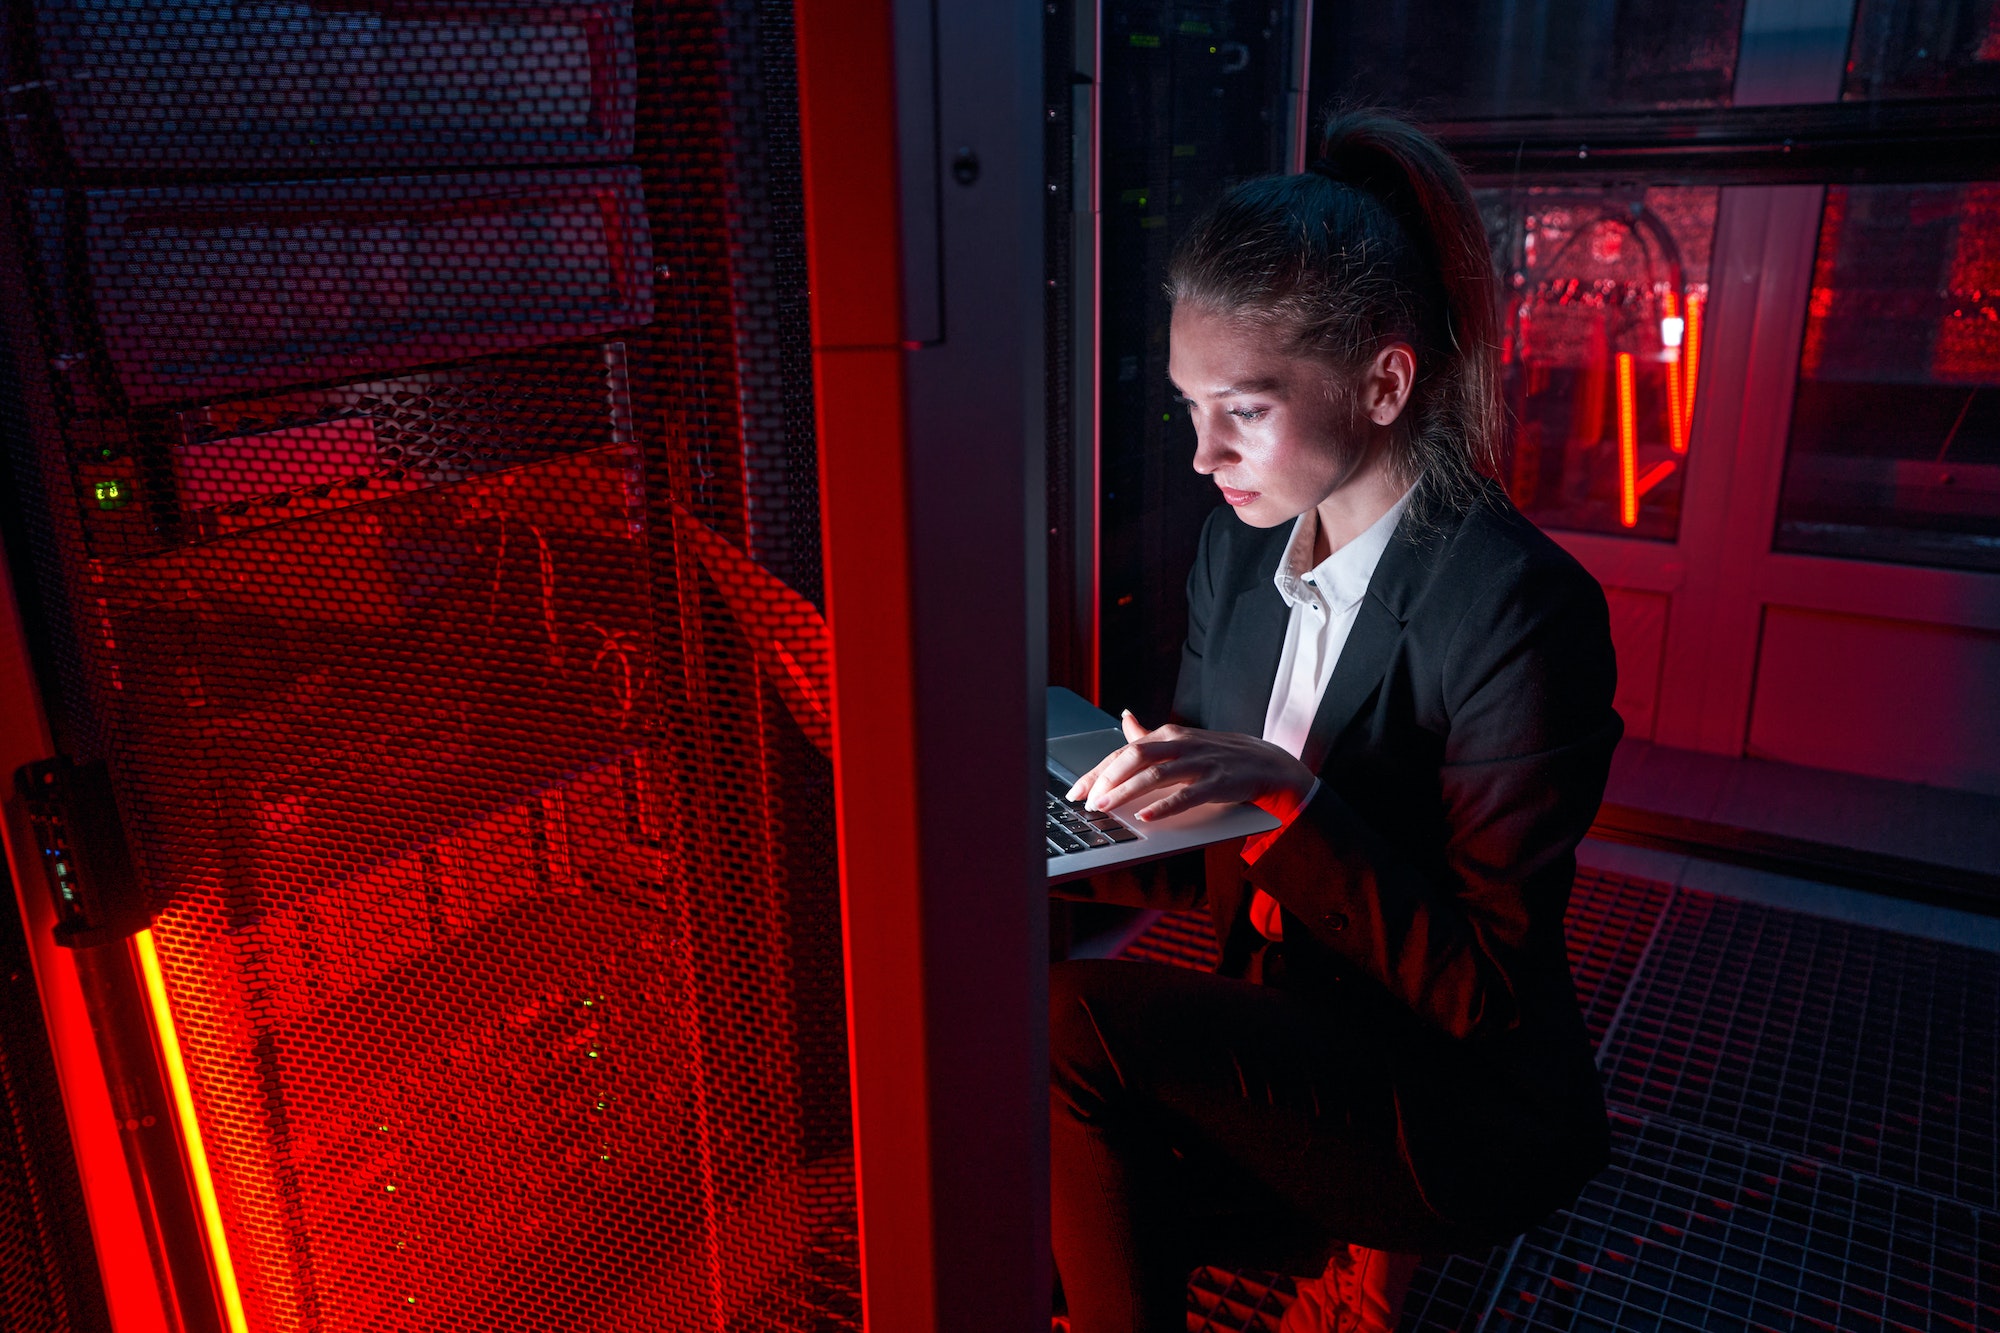 Smart woman working at servers in data center